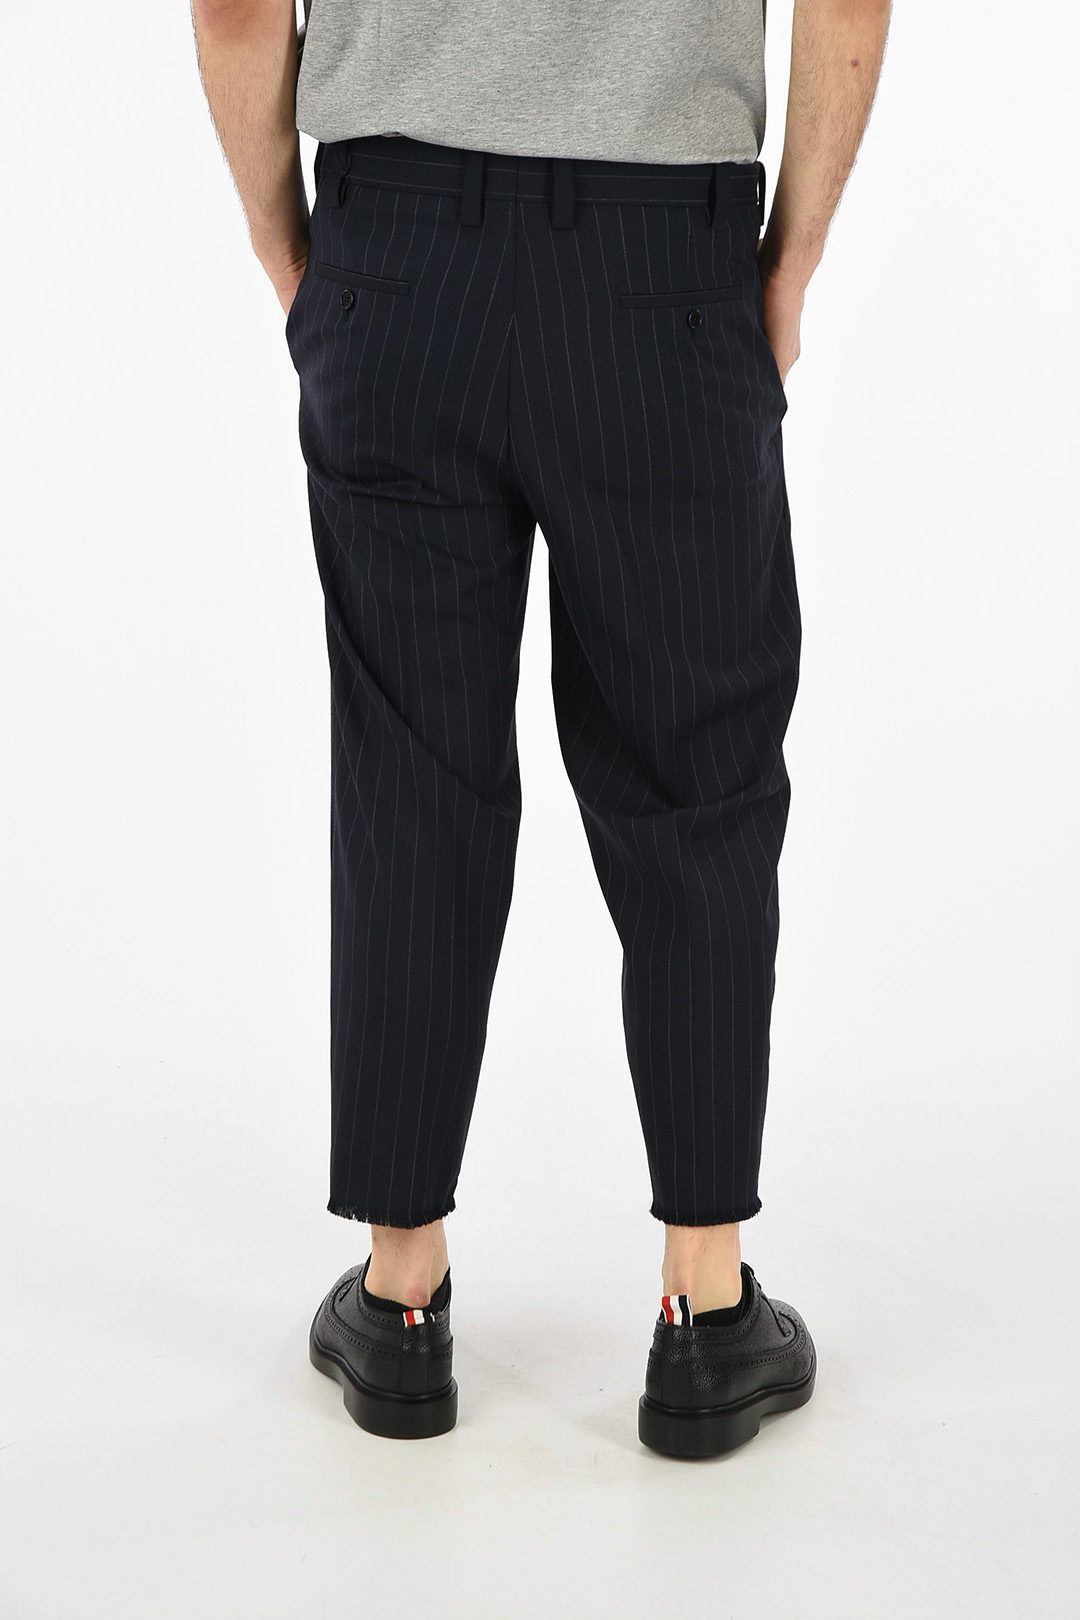 Neil Barrett Pinstripe Pants with Pinces men - Glamood Outlet